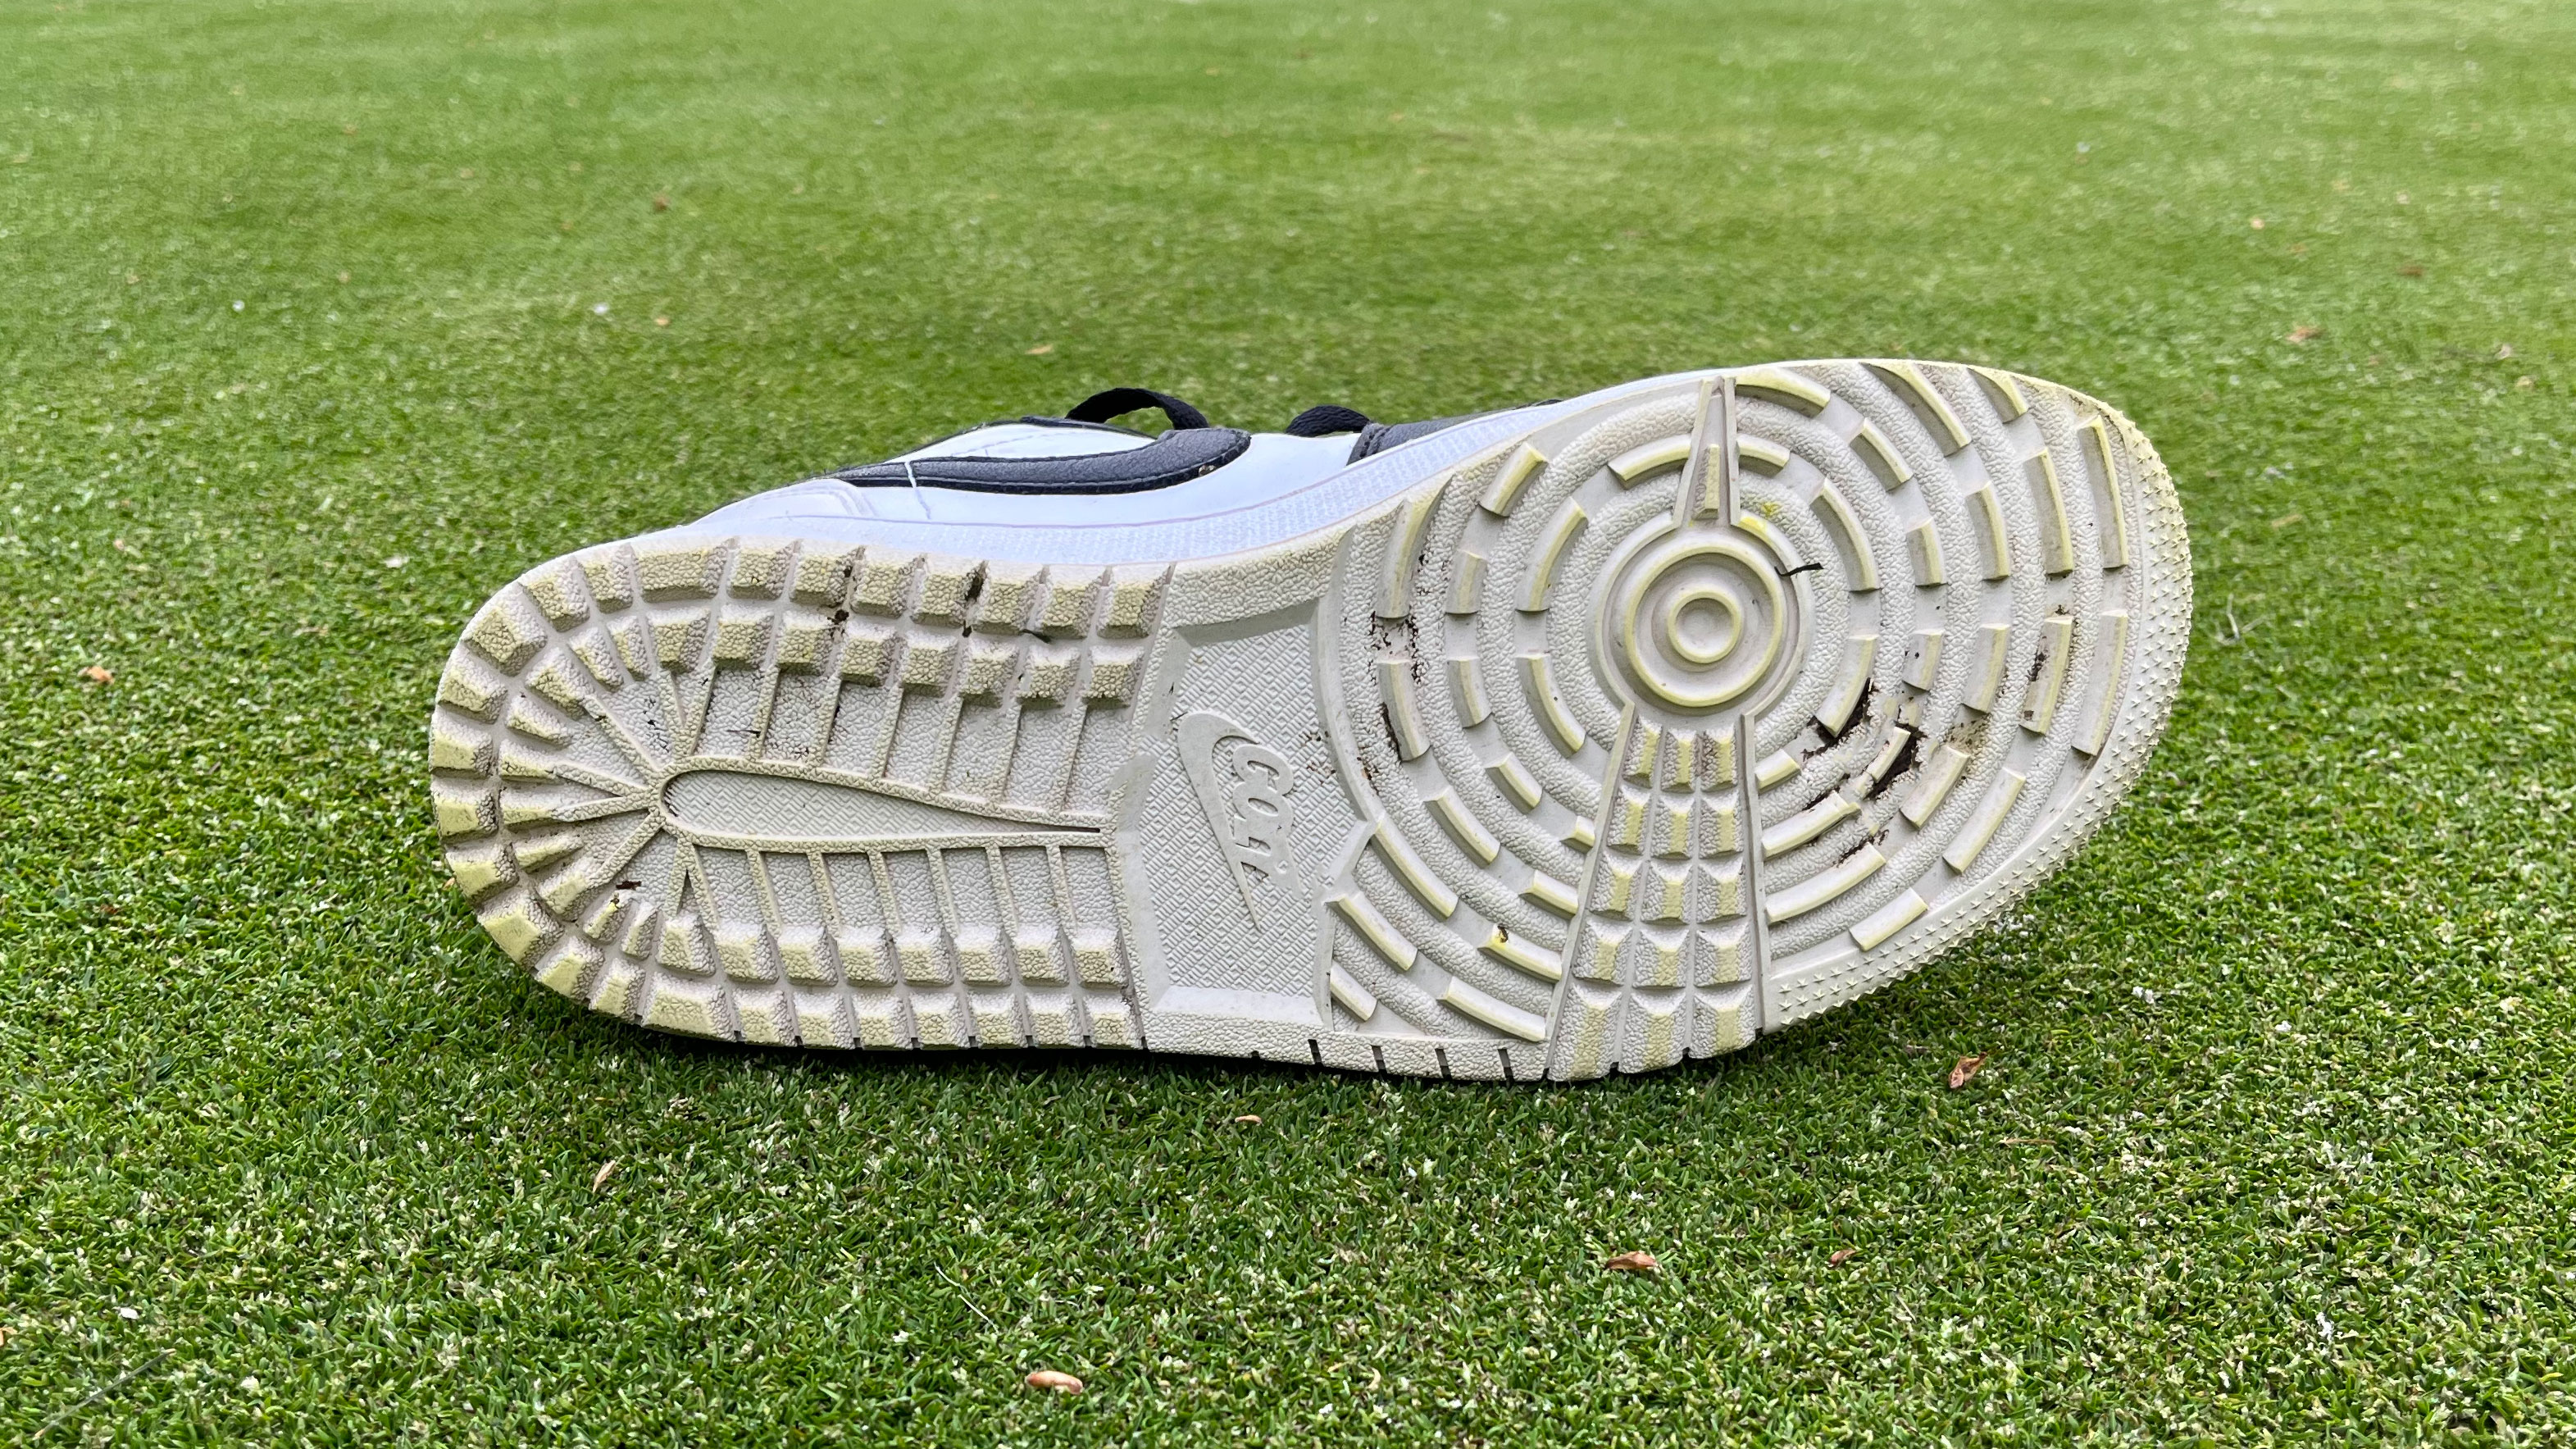 The outsole of the Nike Air Jordan Low 1 G golf shoe